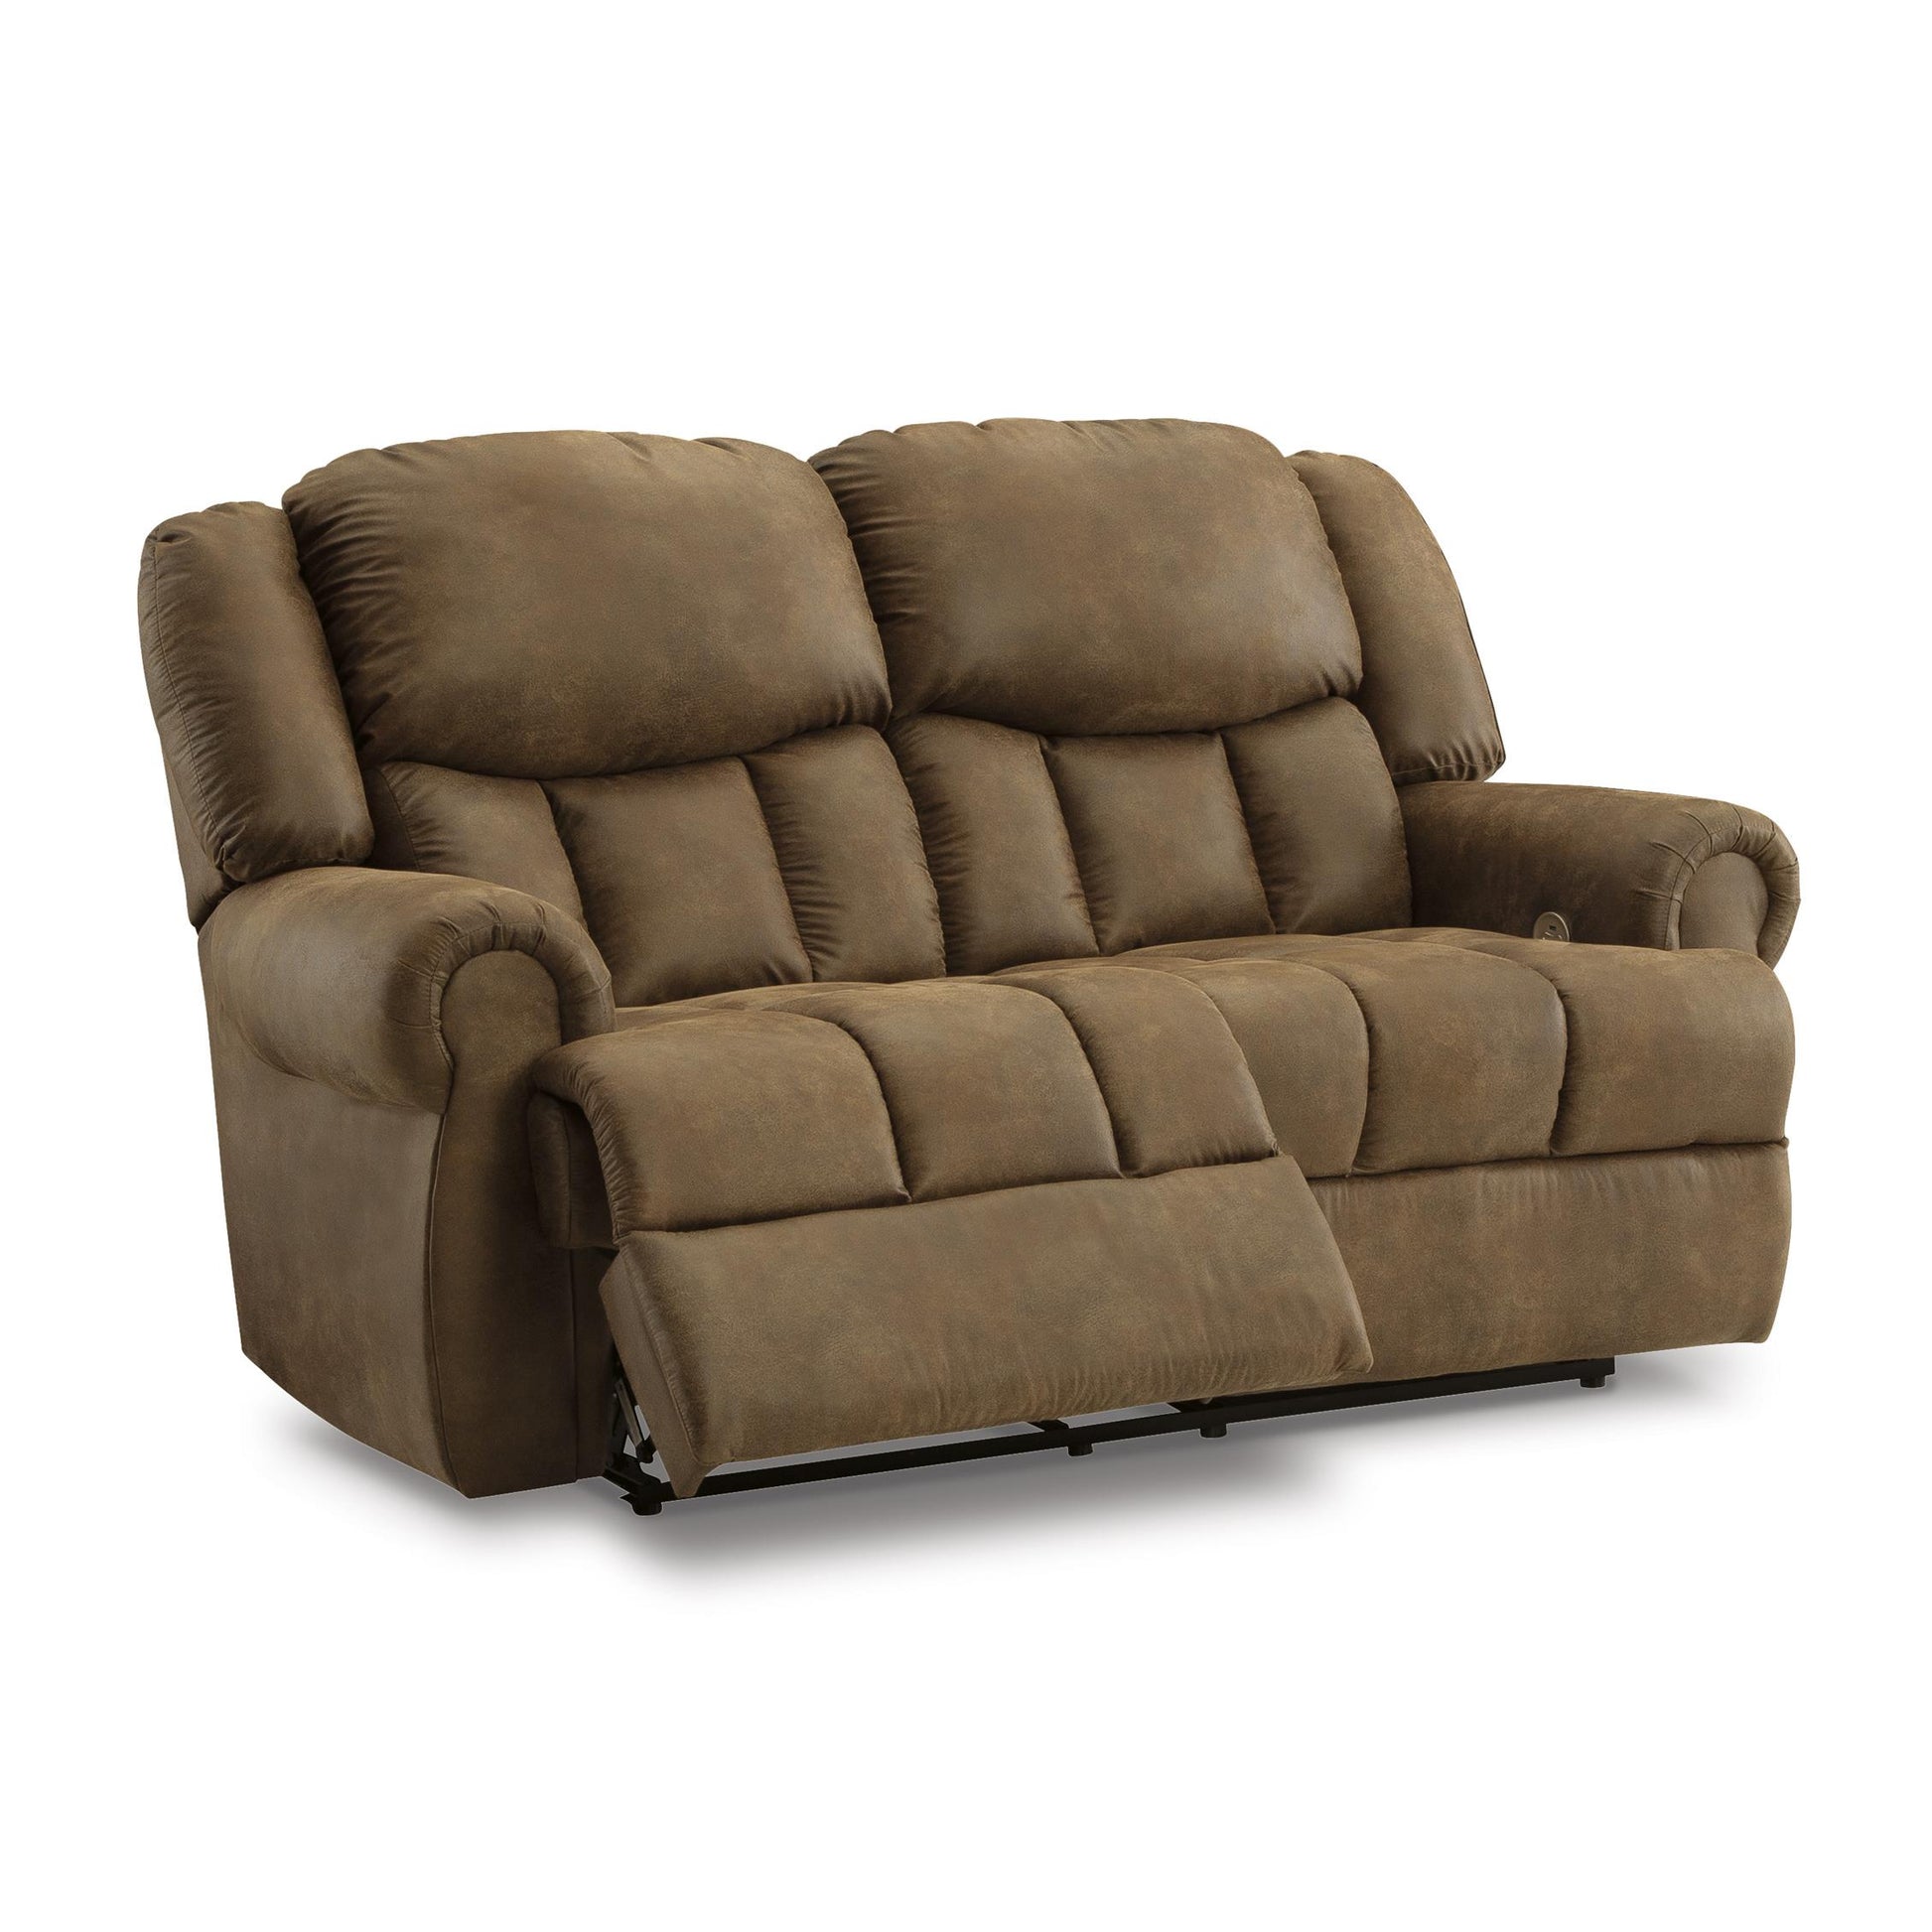 Signature Design by Ashley Boothbay Power Reclining Leather Look Loveseat 4470474 IMAGE 2